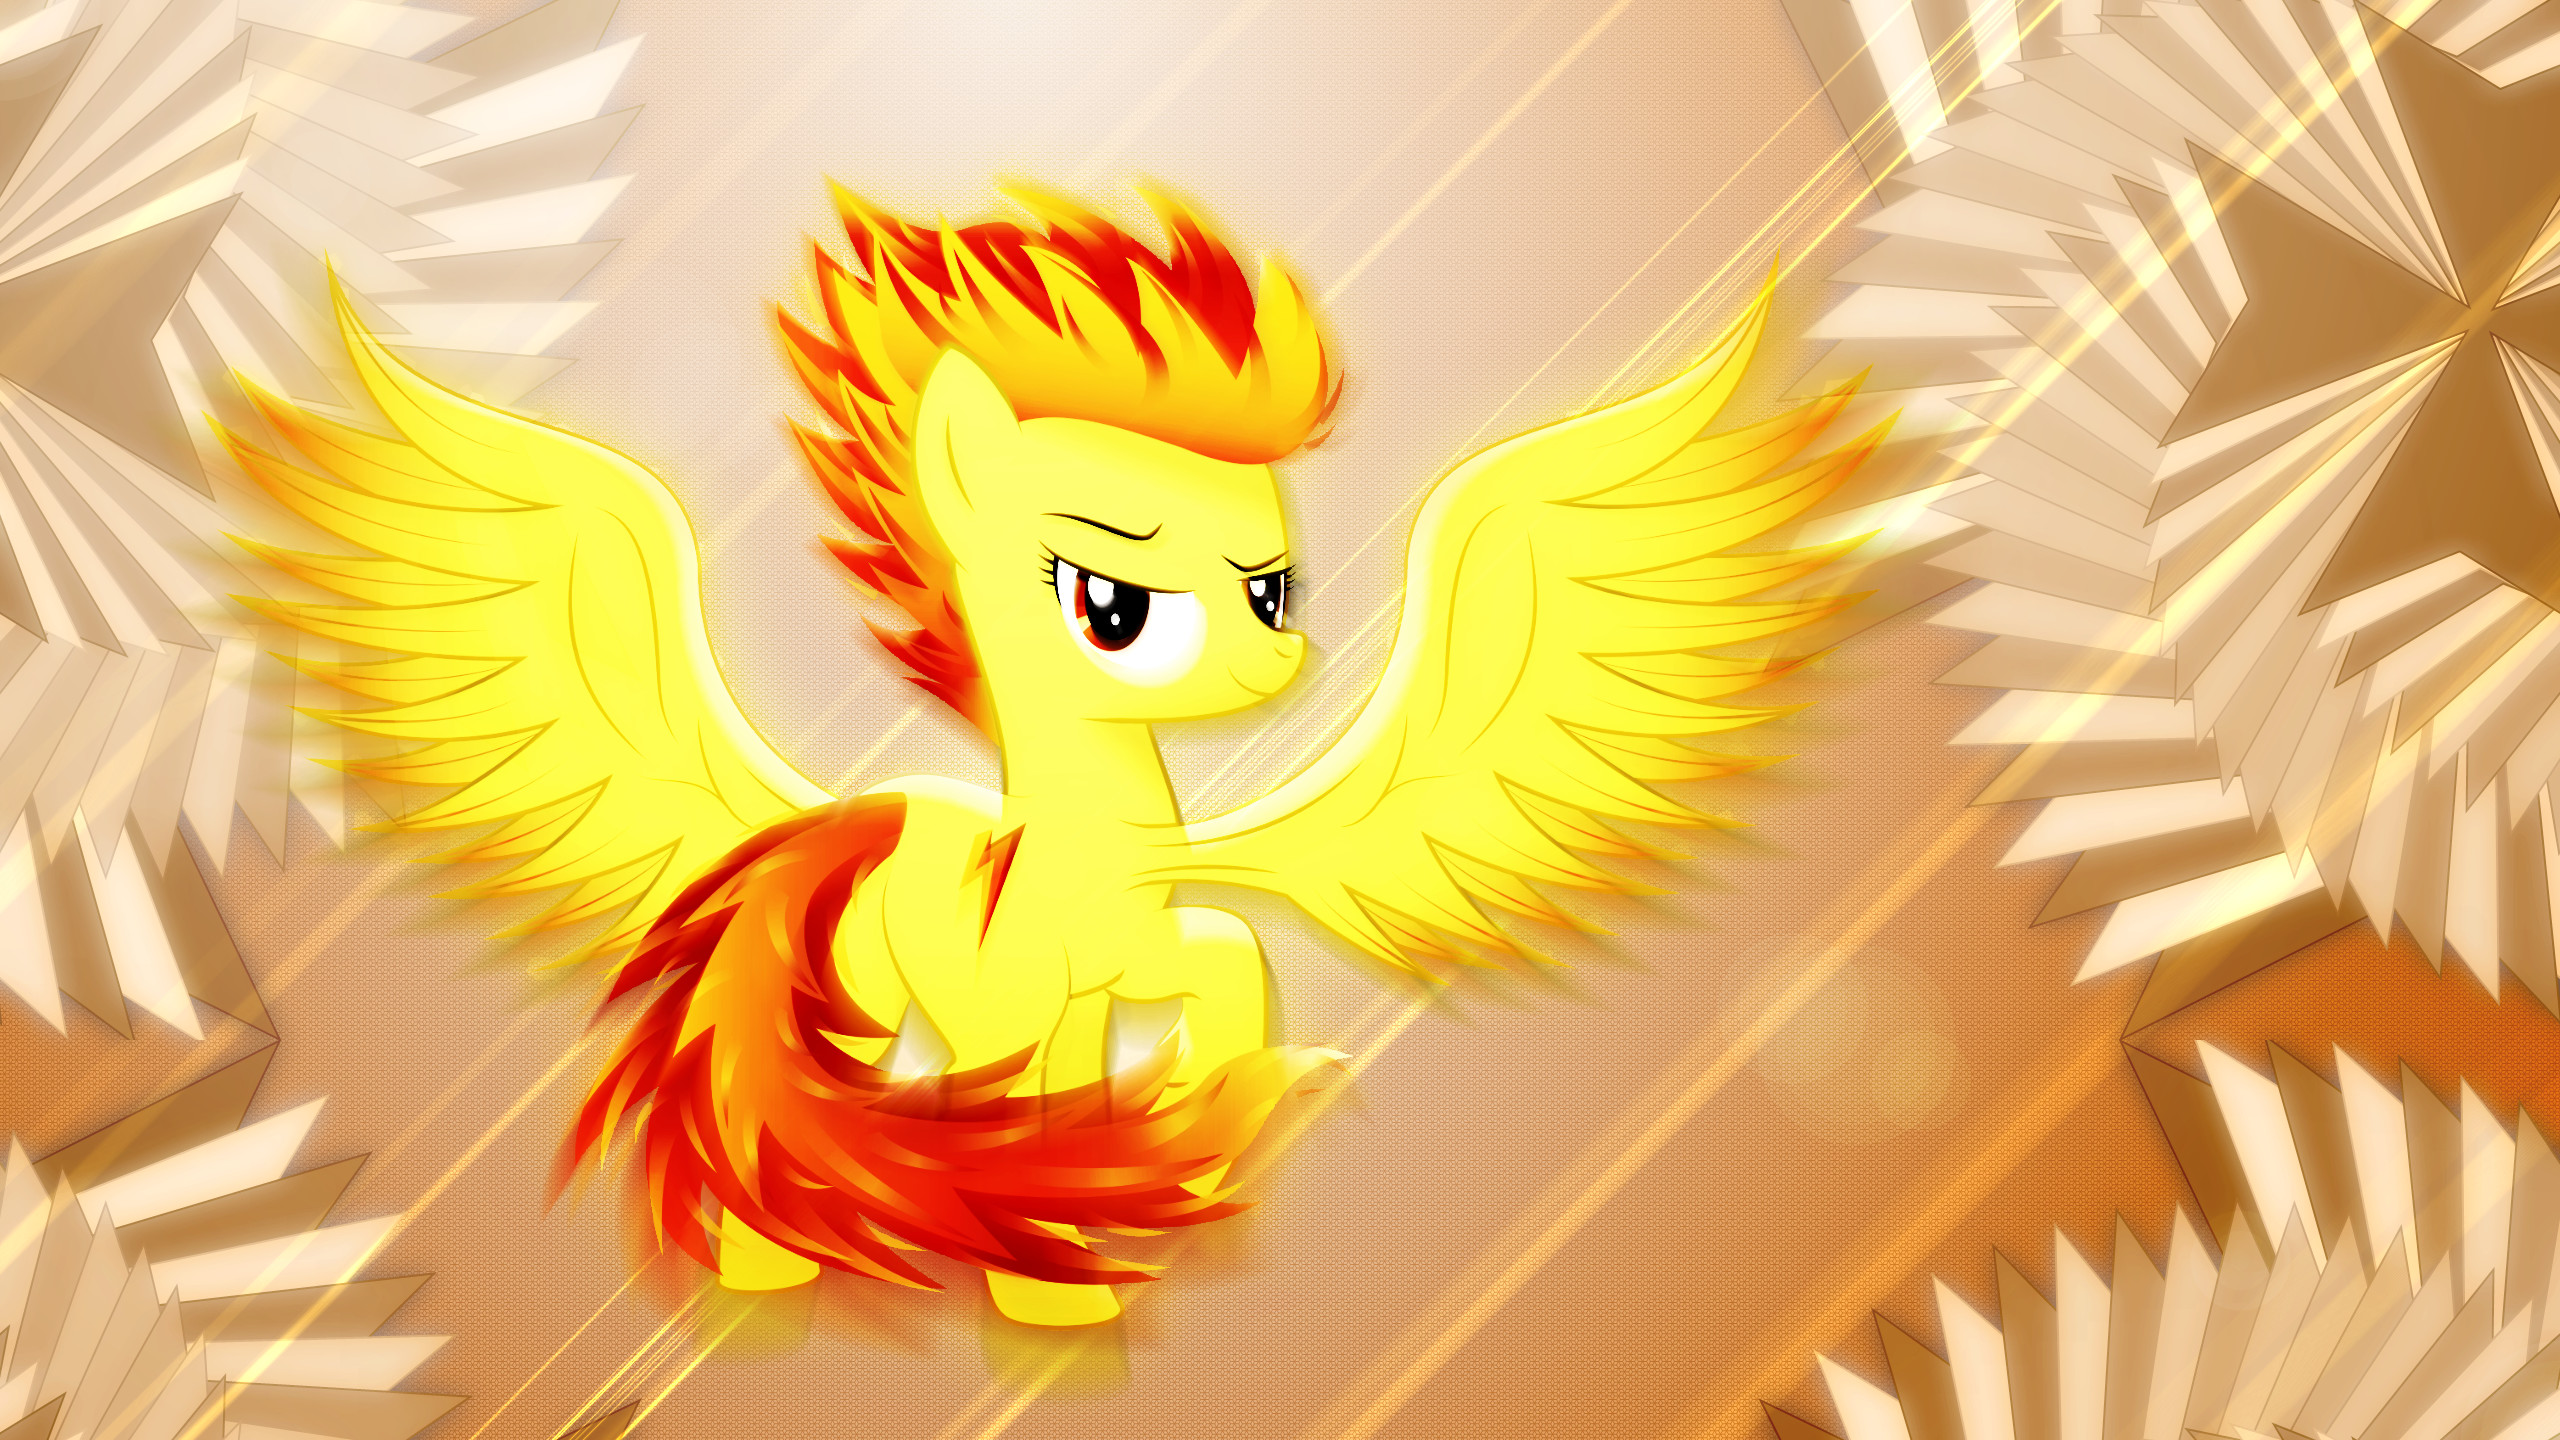 2560x1440 ... Spitfire Wallpaper 3 by Game-BeatX14